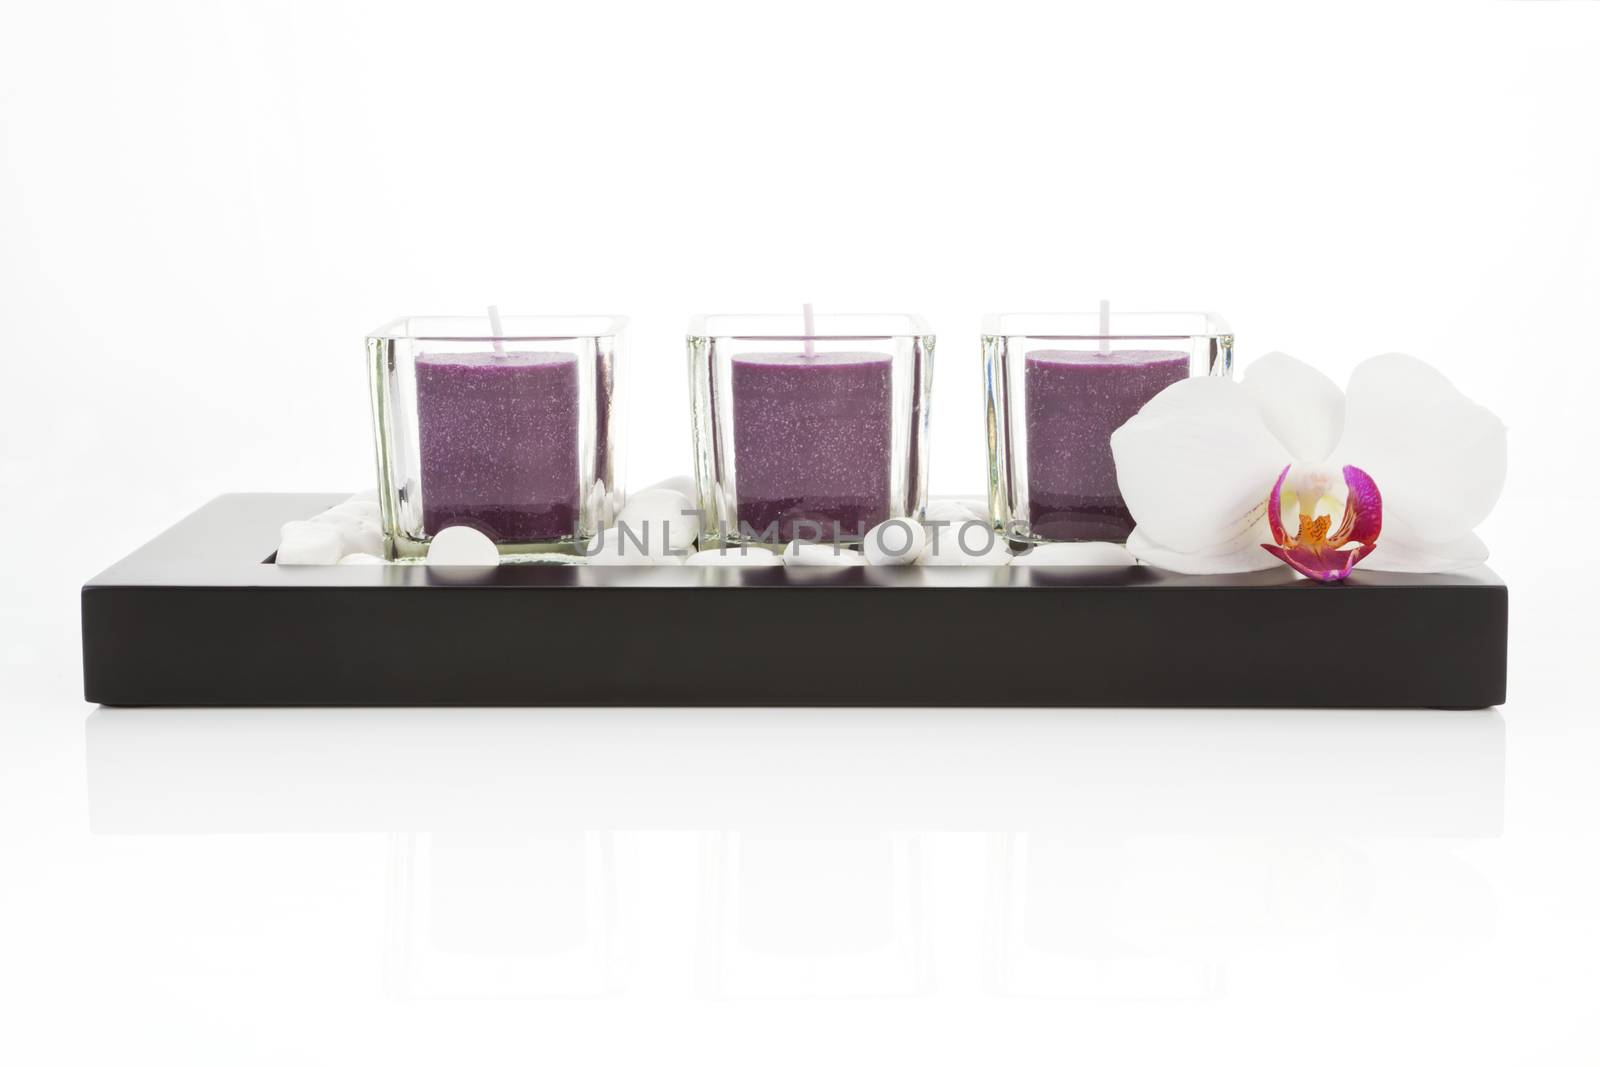 Zen still life with purple candles, white stones and orchid blossom on white background. Zen concept